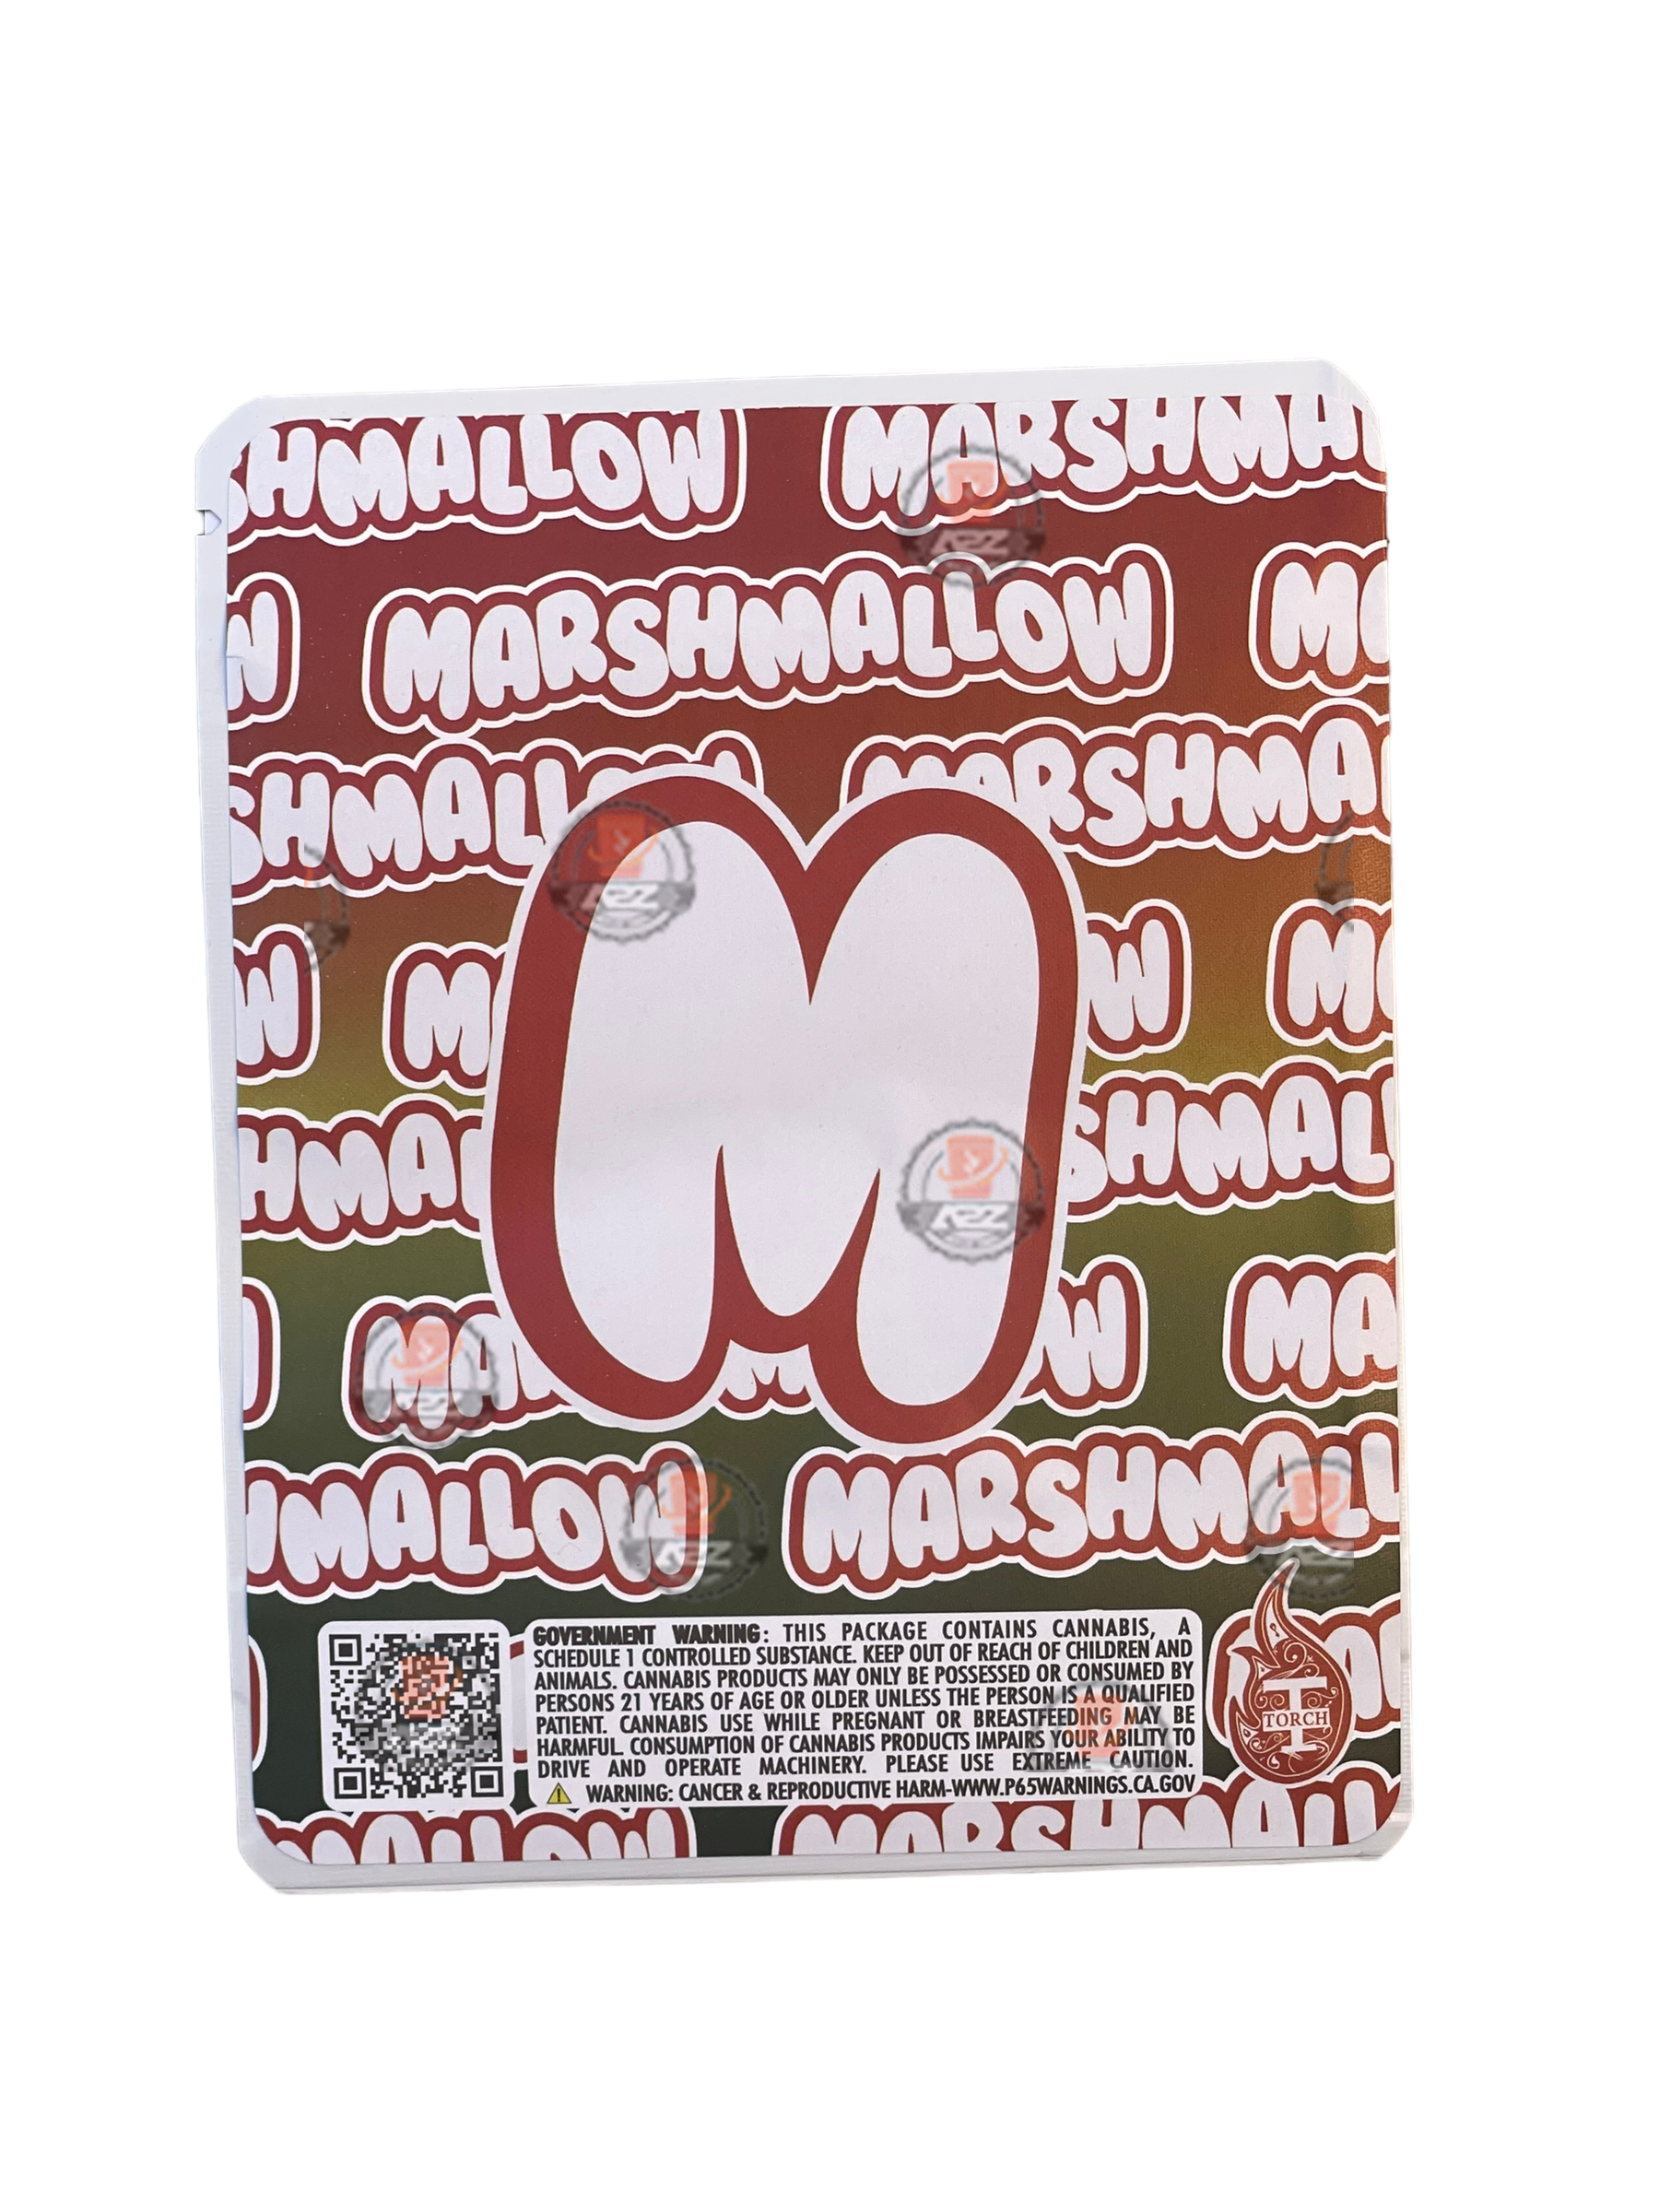 Sprinklez Watermelon Marshmallow Mylar Bags 3.5g Sticker base Bag -With stickers and labels